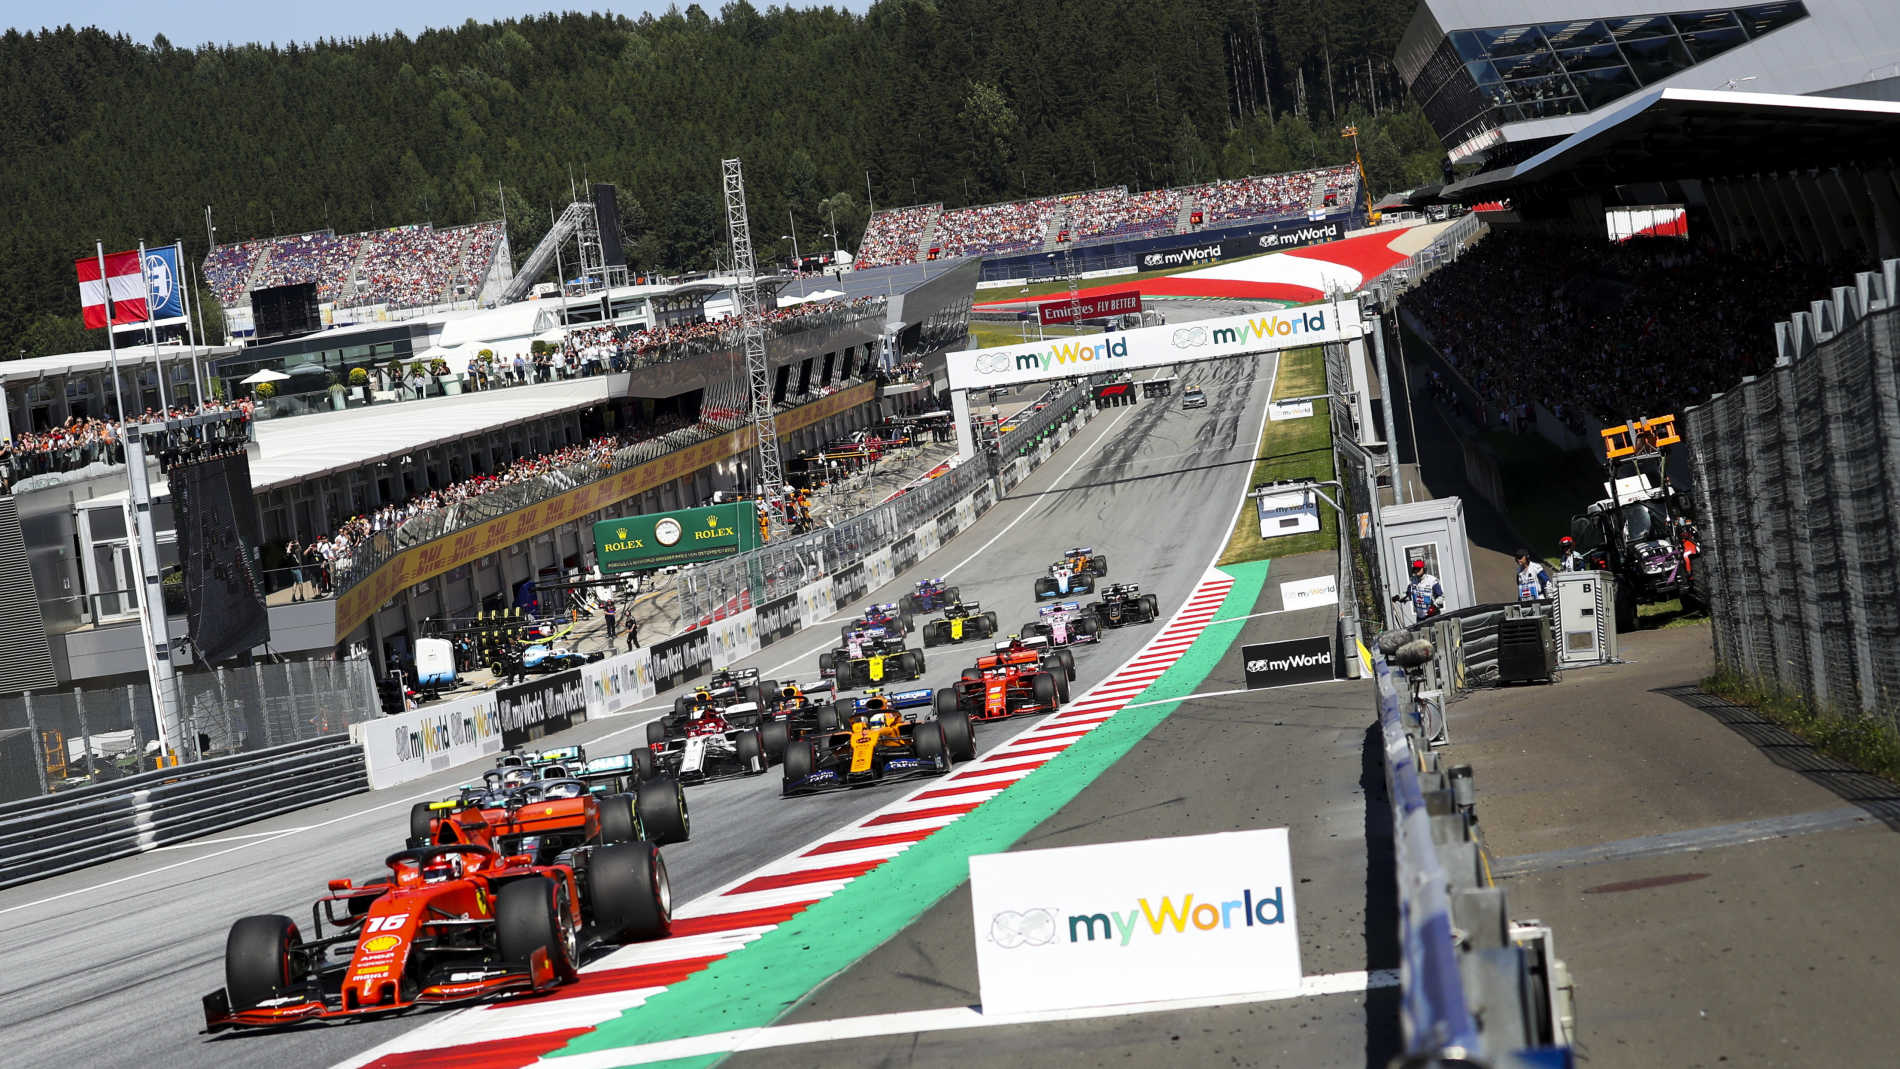 Sinis Prove federation F1 confirms first 8 races of revised 2020 calendar, starting with Austria  double header | Formula 1®